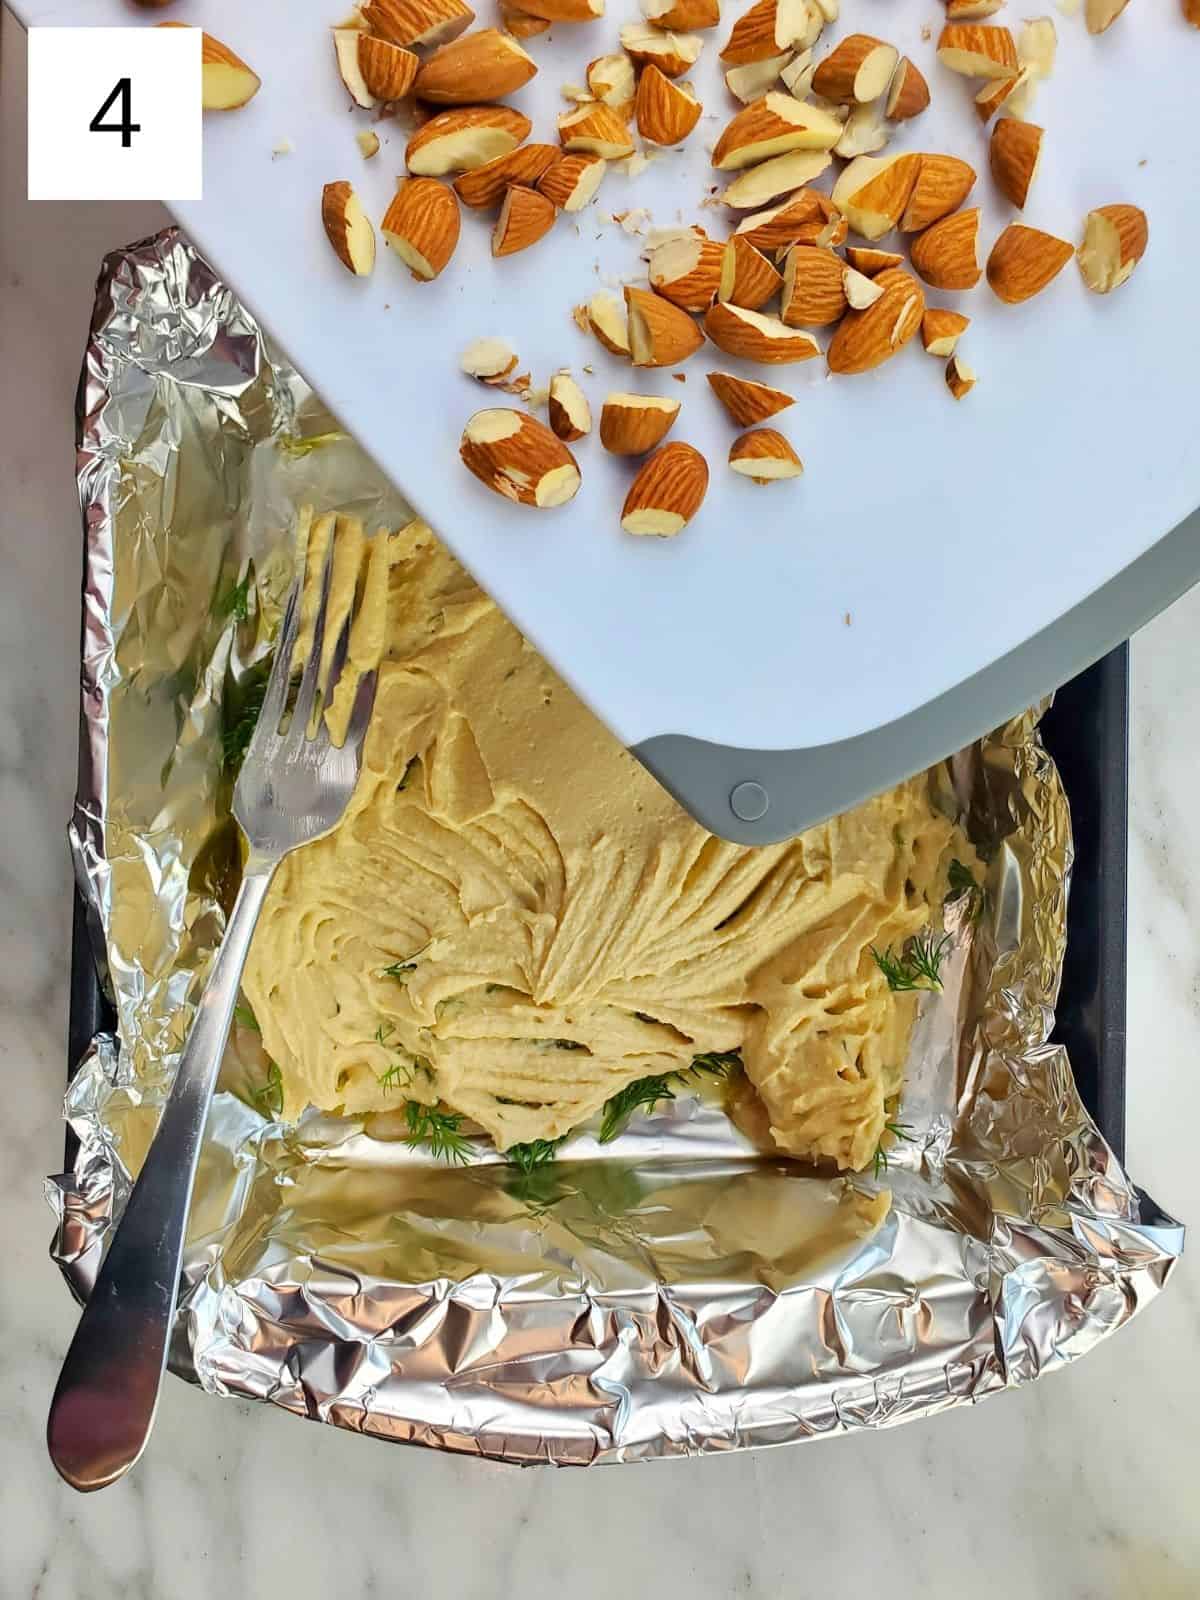 chopped almonds being sprinkled over hummus-topped chicken tenders on a foil-lined baking tray.